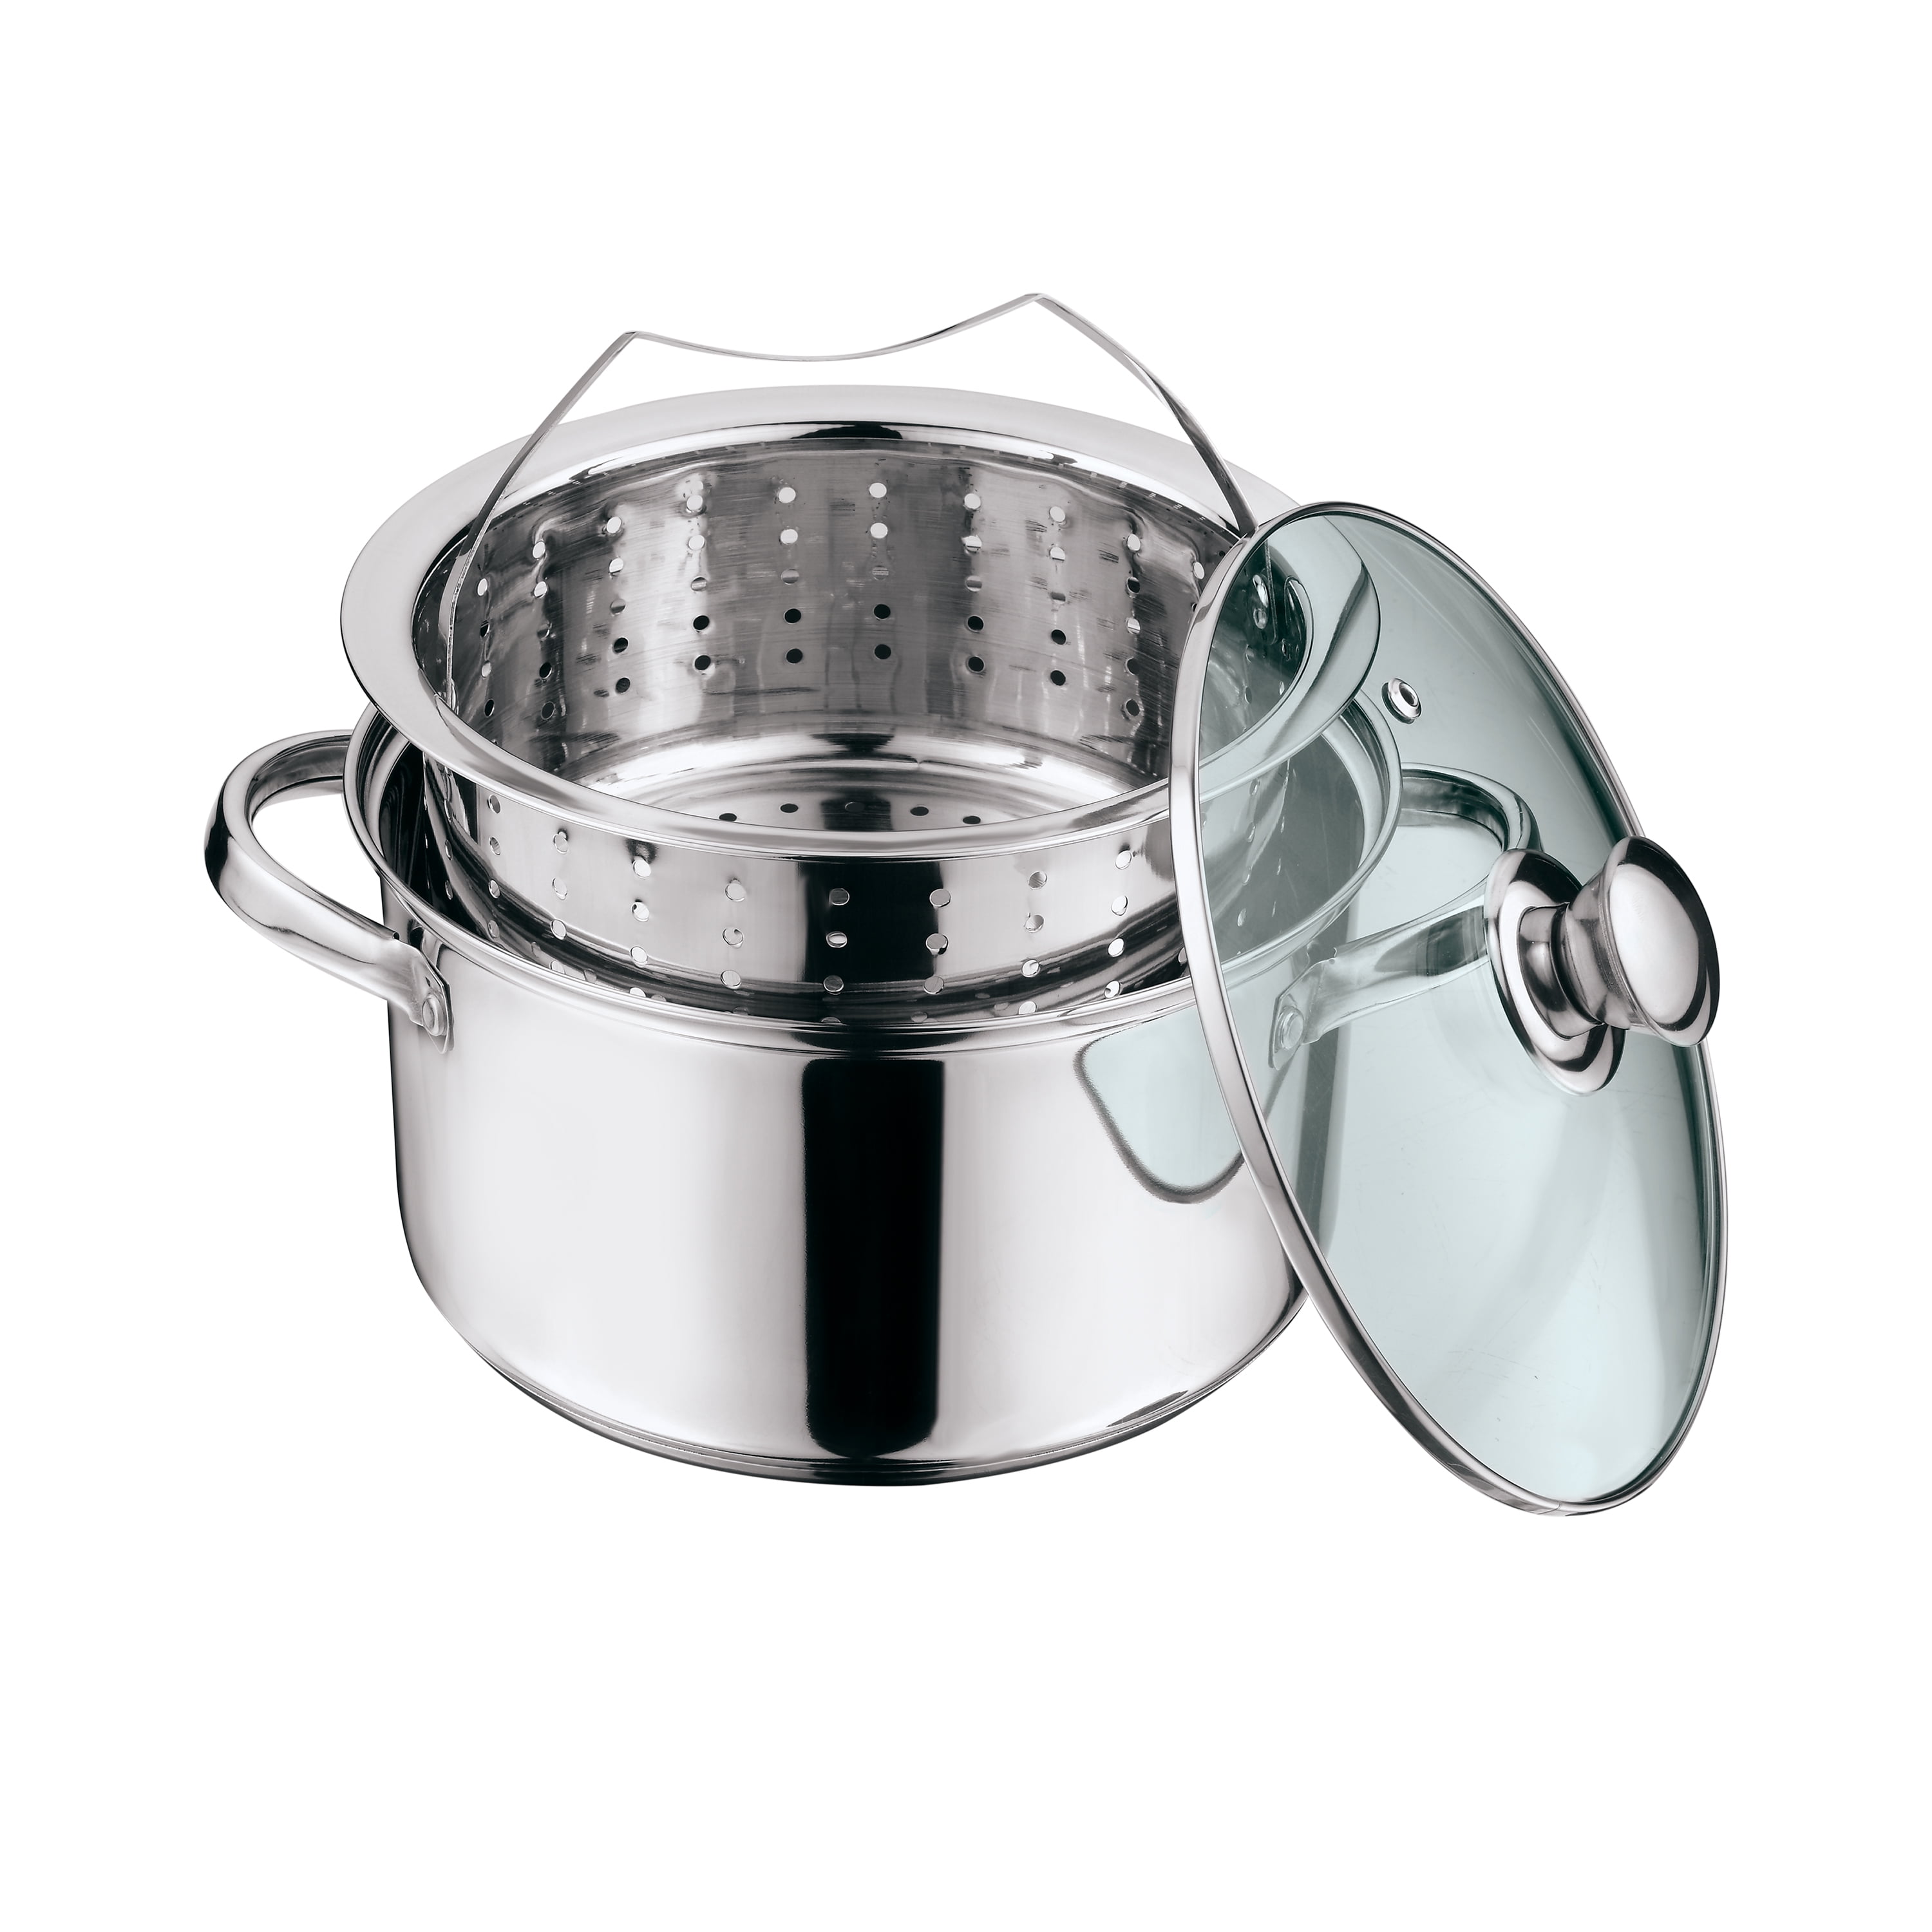 Stainless Steel Pot With Steamer